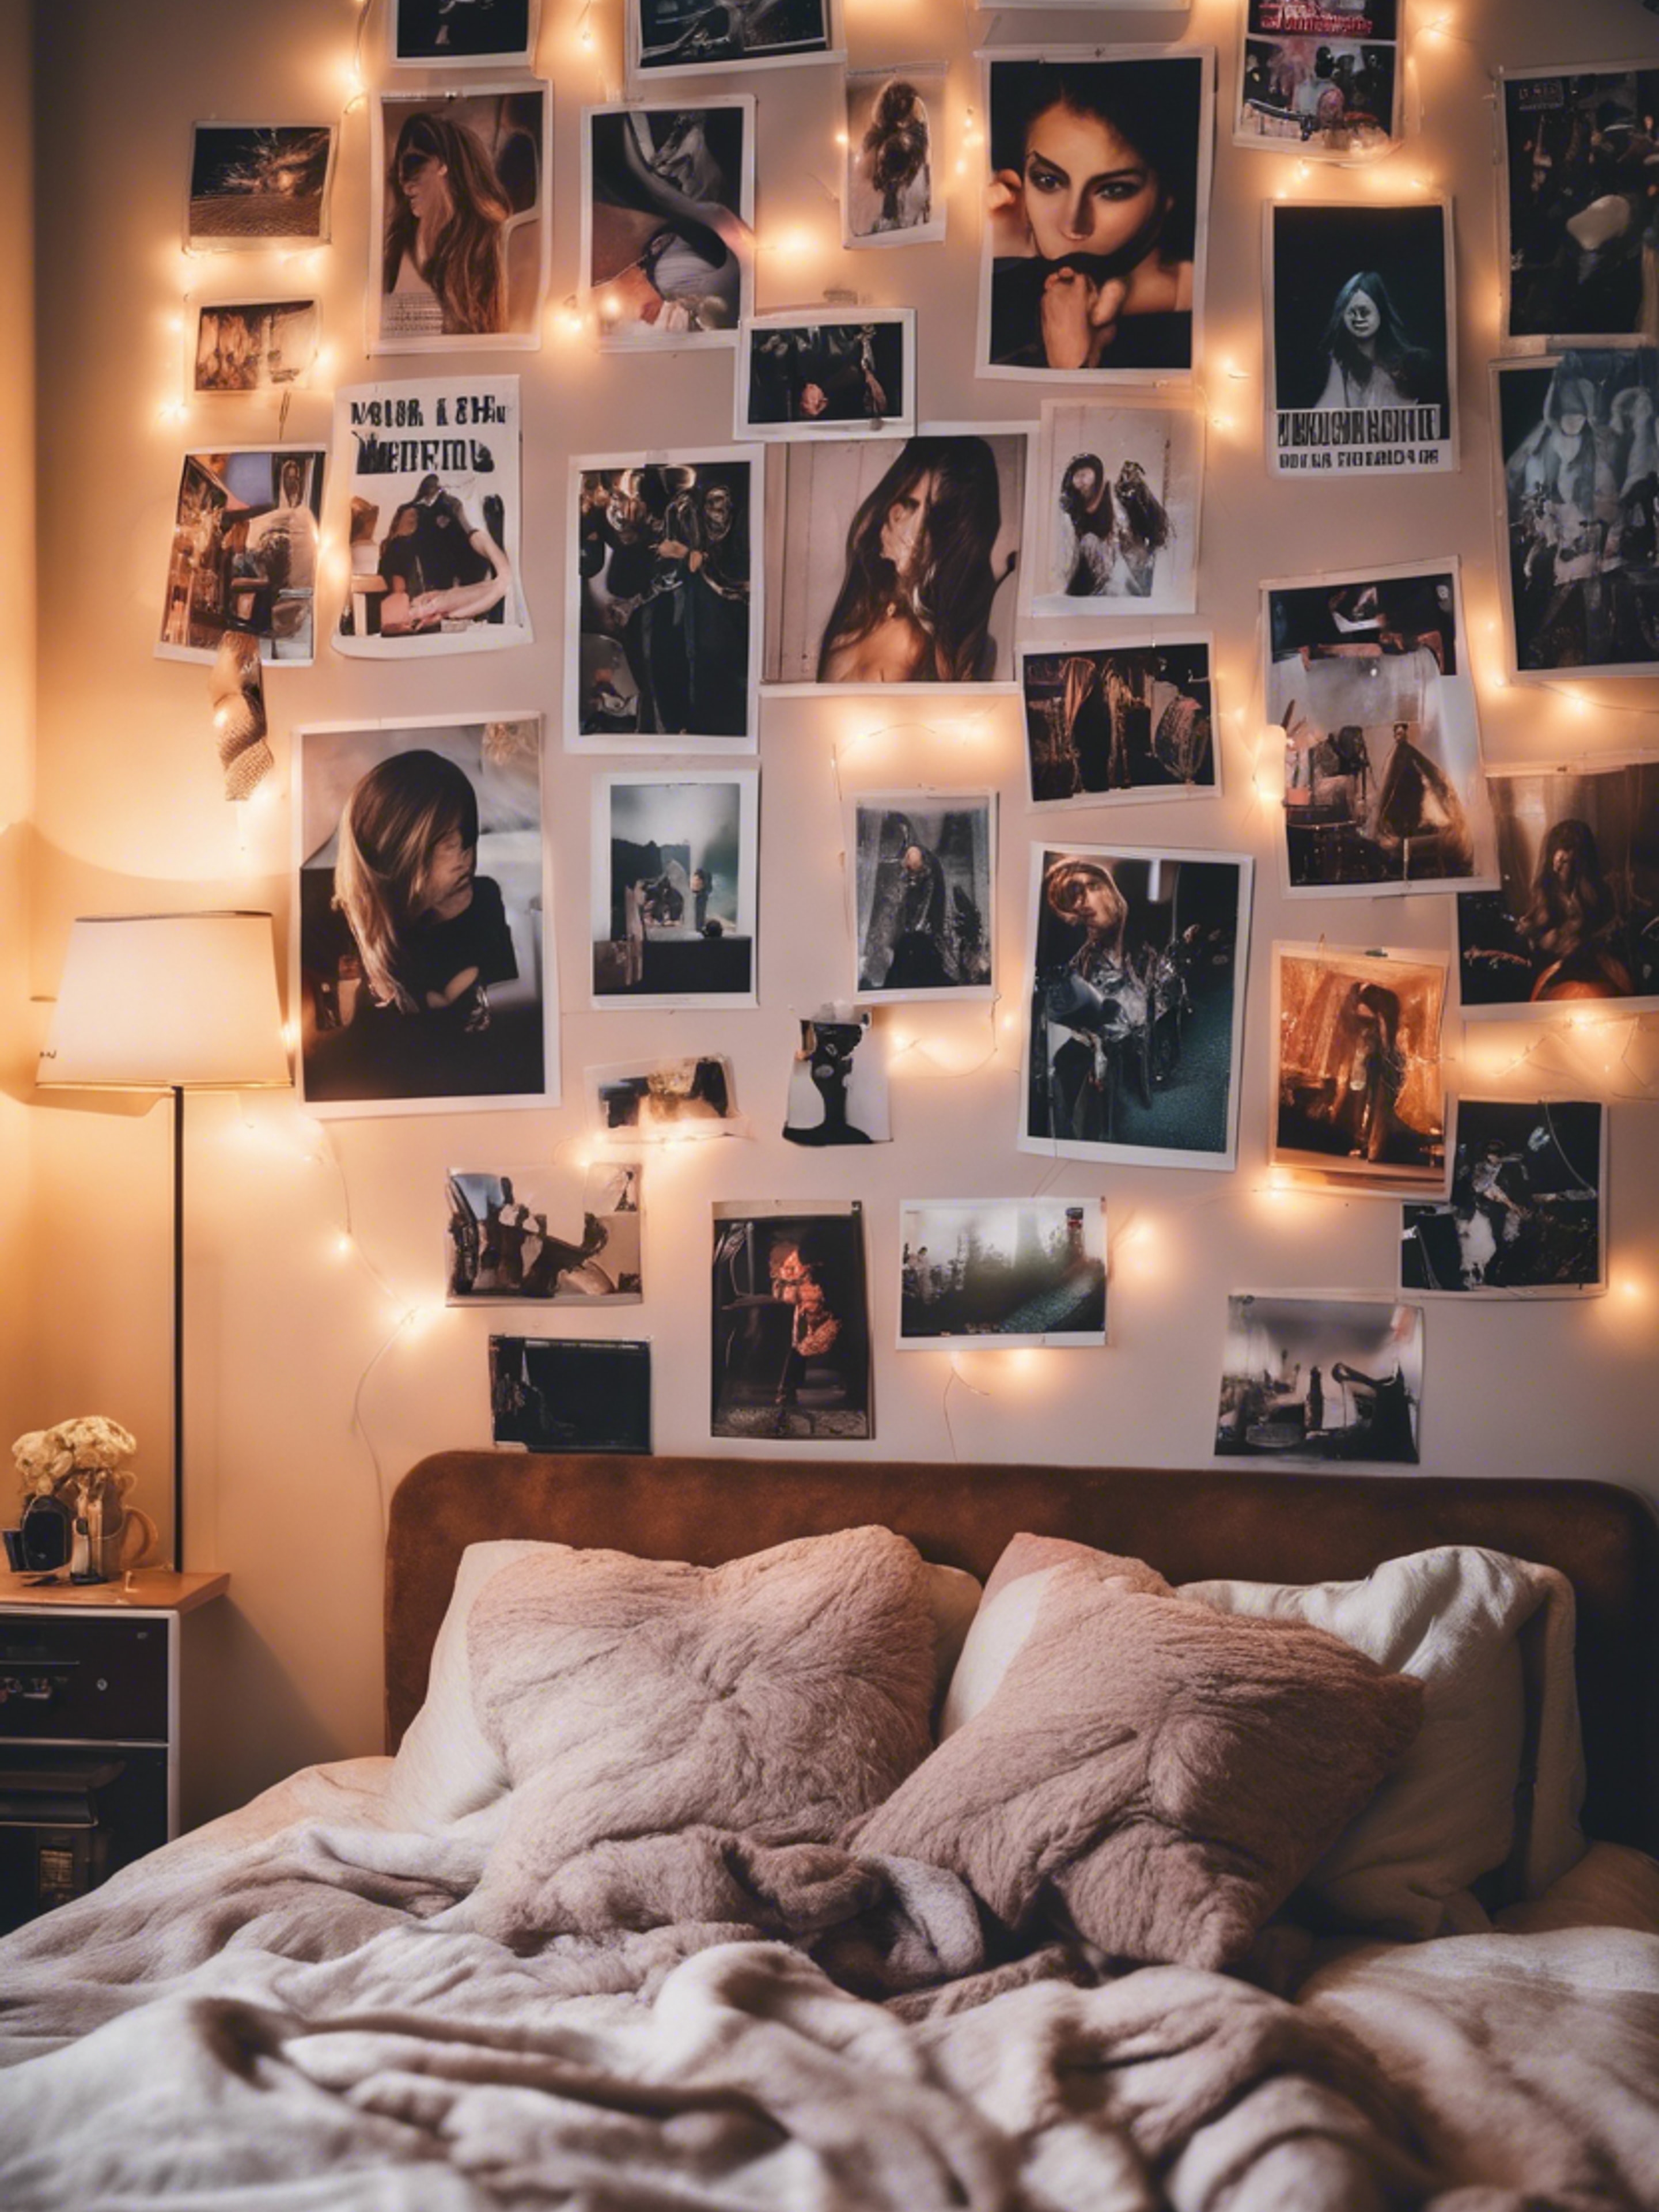 A modern and stylish teenage girl's room decorated with band posters, fairy lights, and polaroid pictures. Шпалери[8dbab99d18ae495d873b]